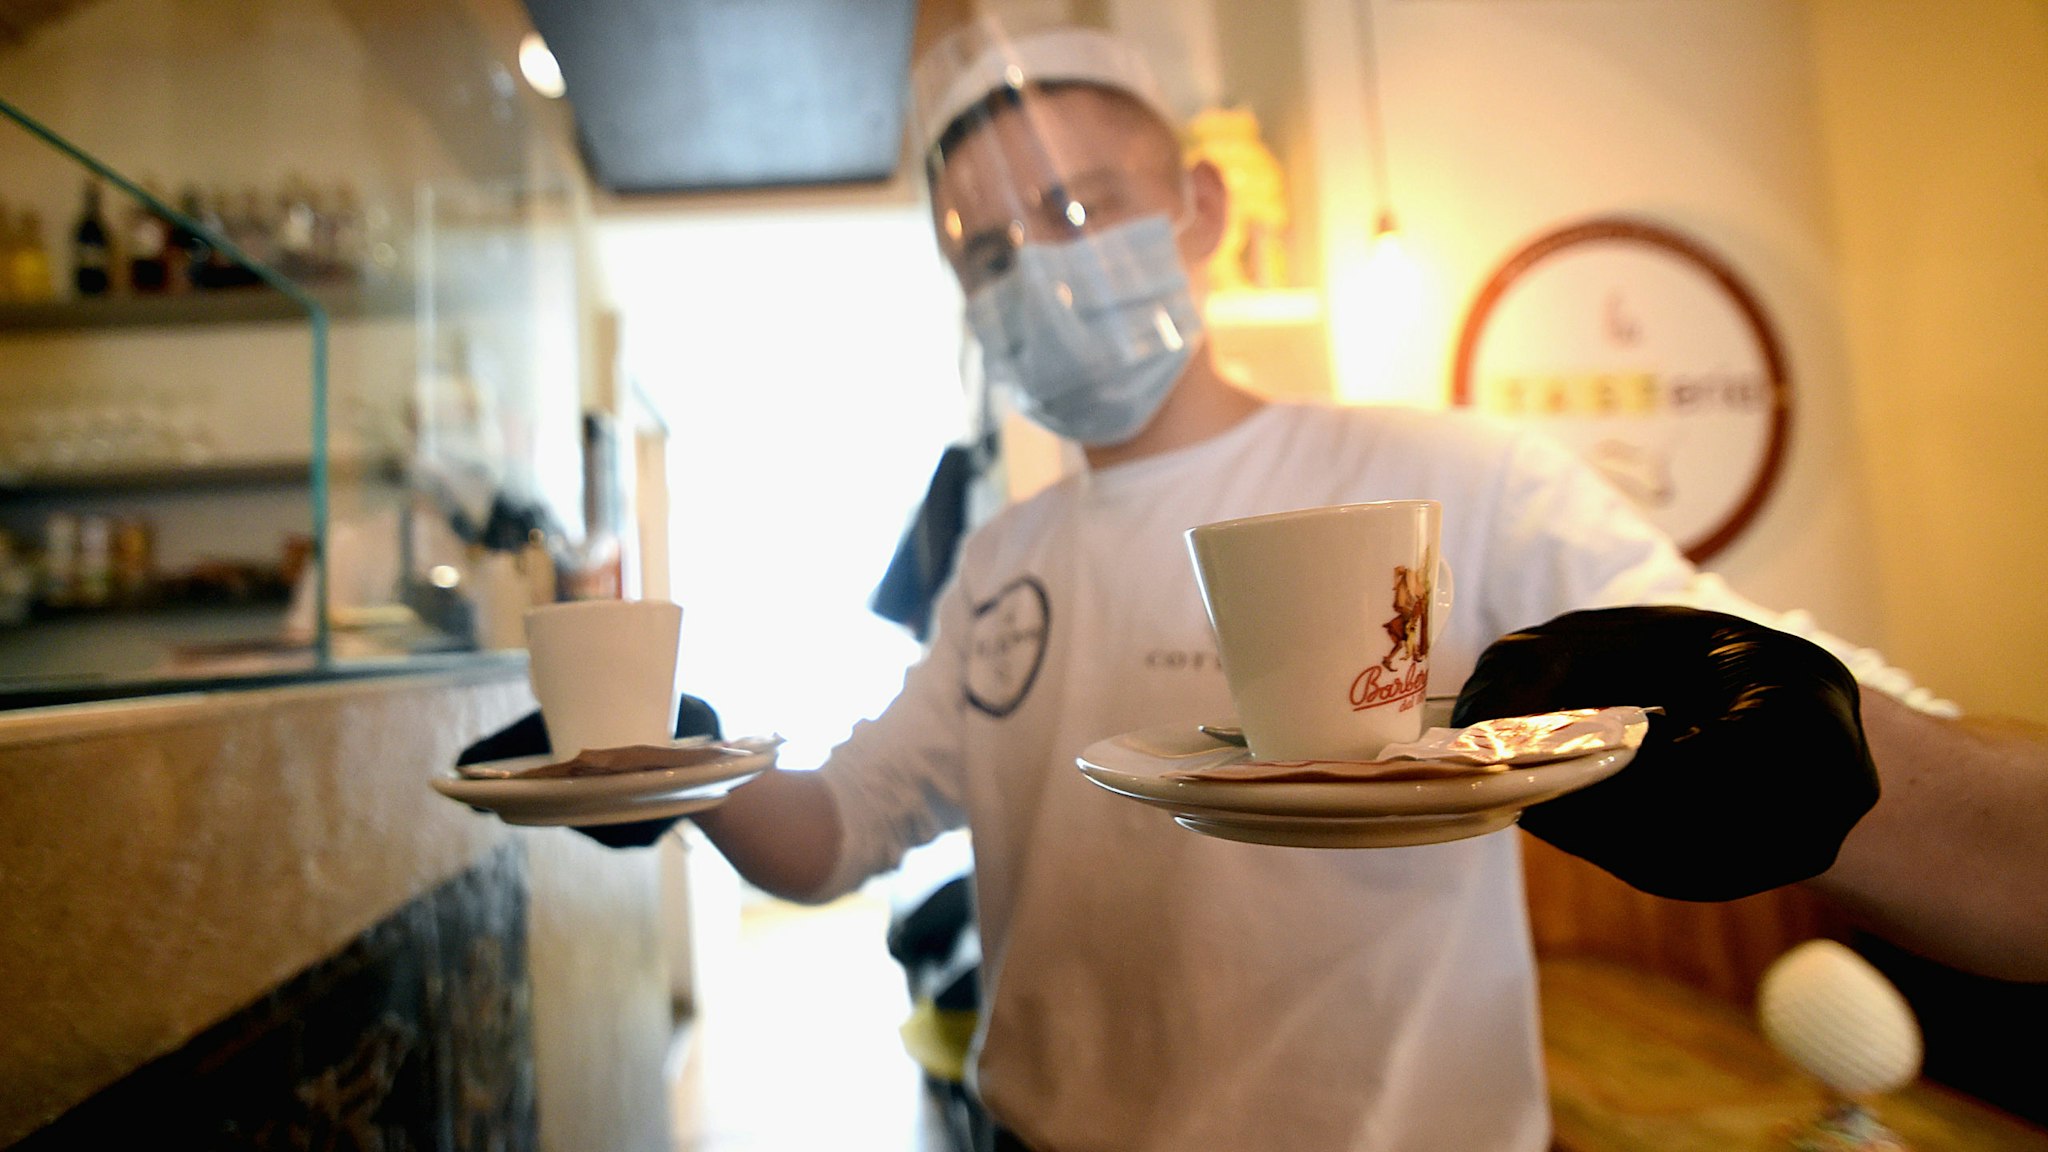 MILAN, ITALY - MAY 18: A waiter from the bistro 'La Tasteria' wearing a protective plexiglass mask brings two coffees to the table on May 18, 2020 in Milan, Italy. Restaurants, bars, cafes, hairdressers and other shops have reopened, subject to social distancing measures, after more than two months of a nationwide lockdown meant to curb the spread of Covid-19. (Photo by Pier Marco Tacca/Getty Images)